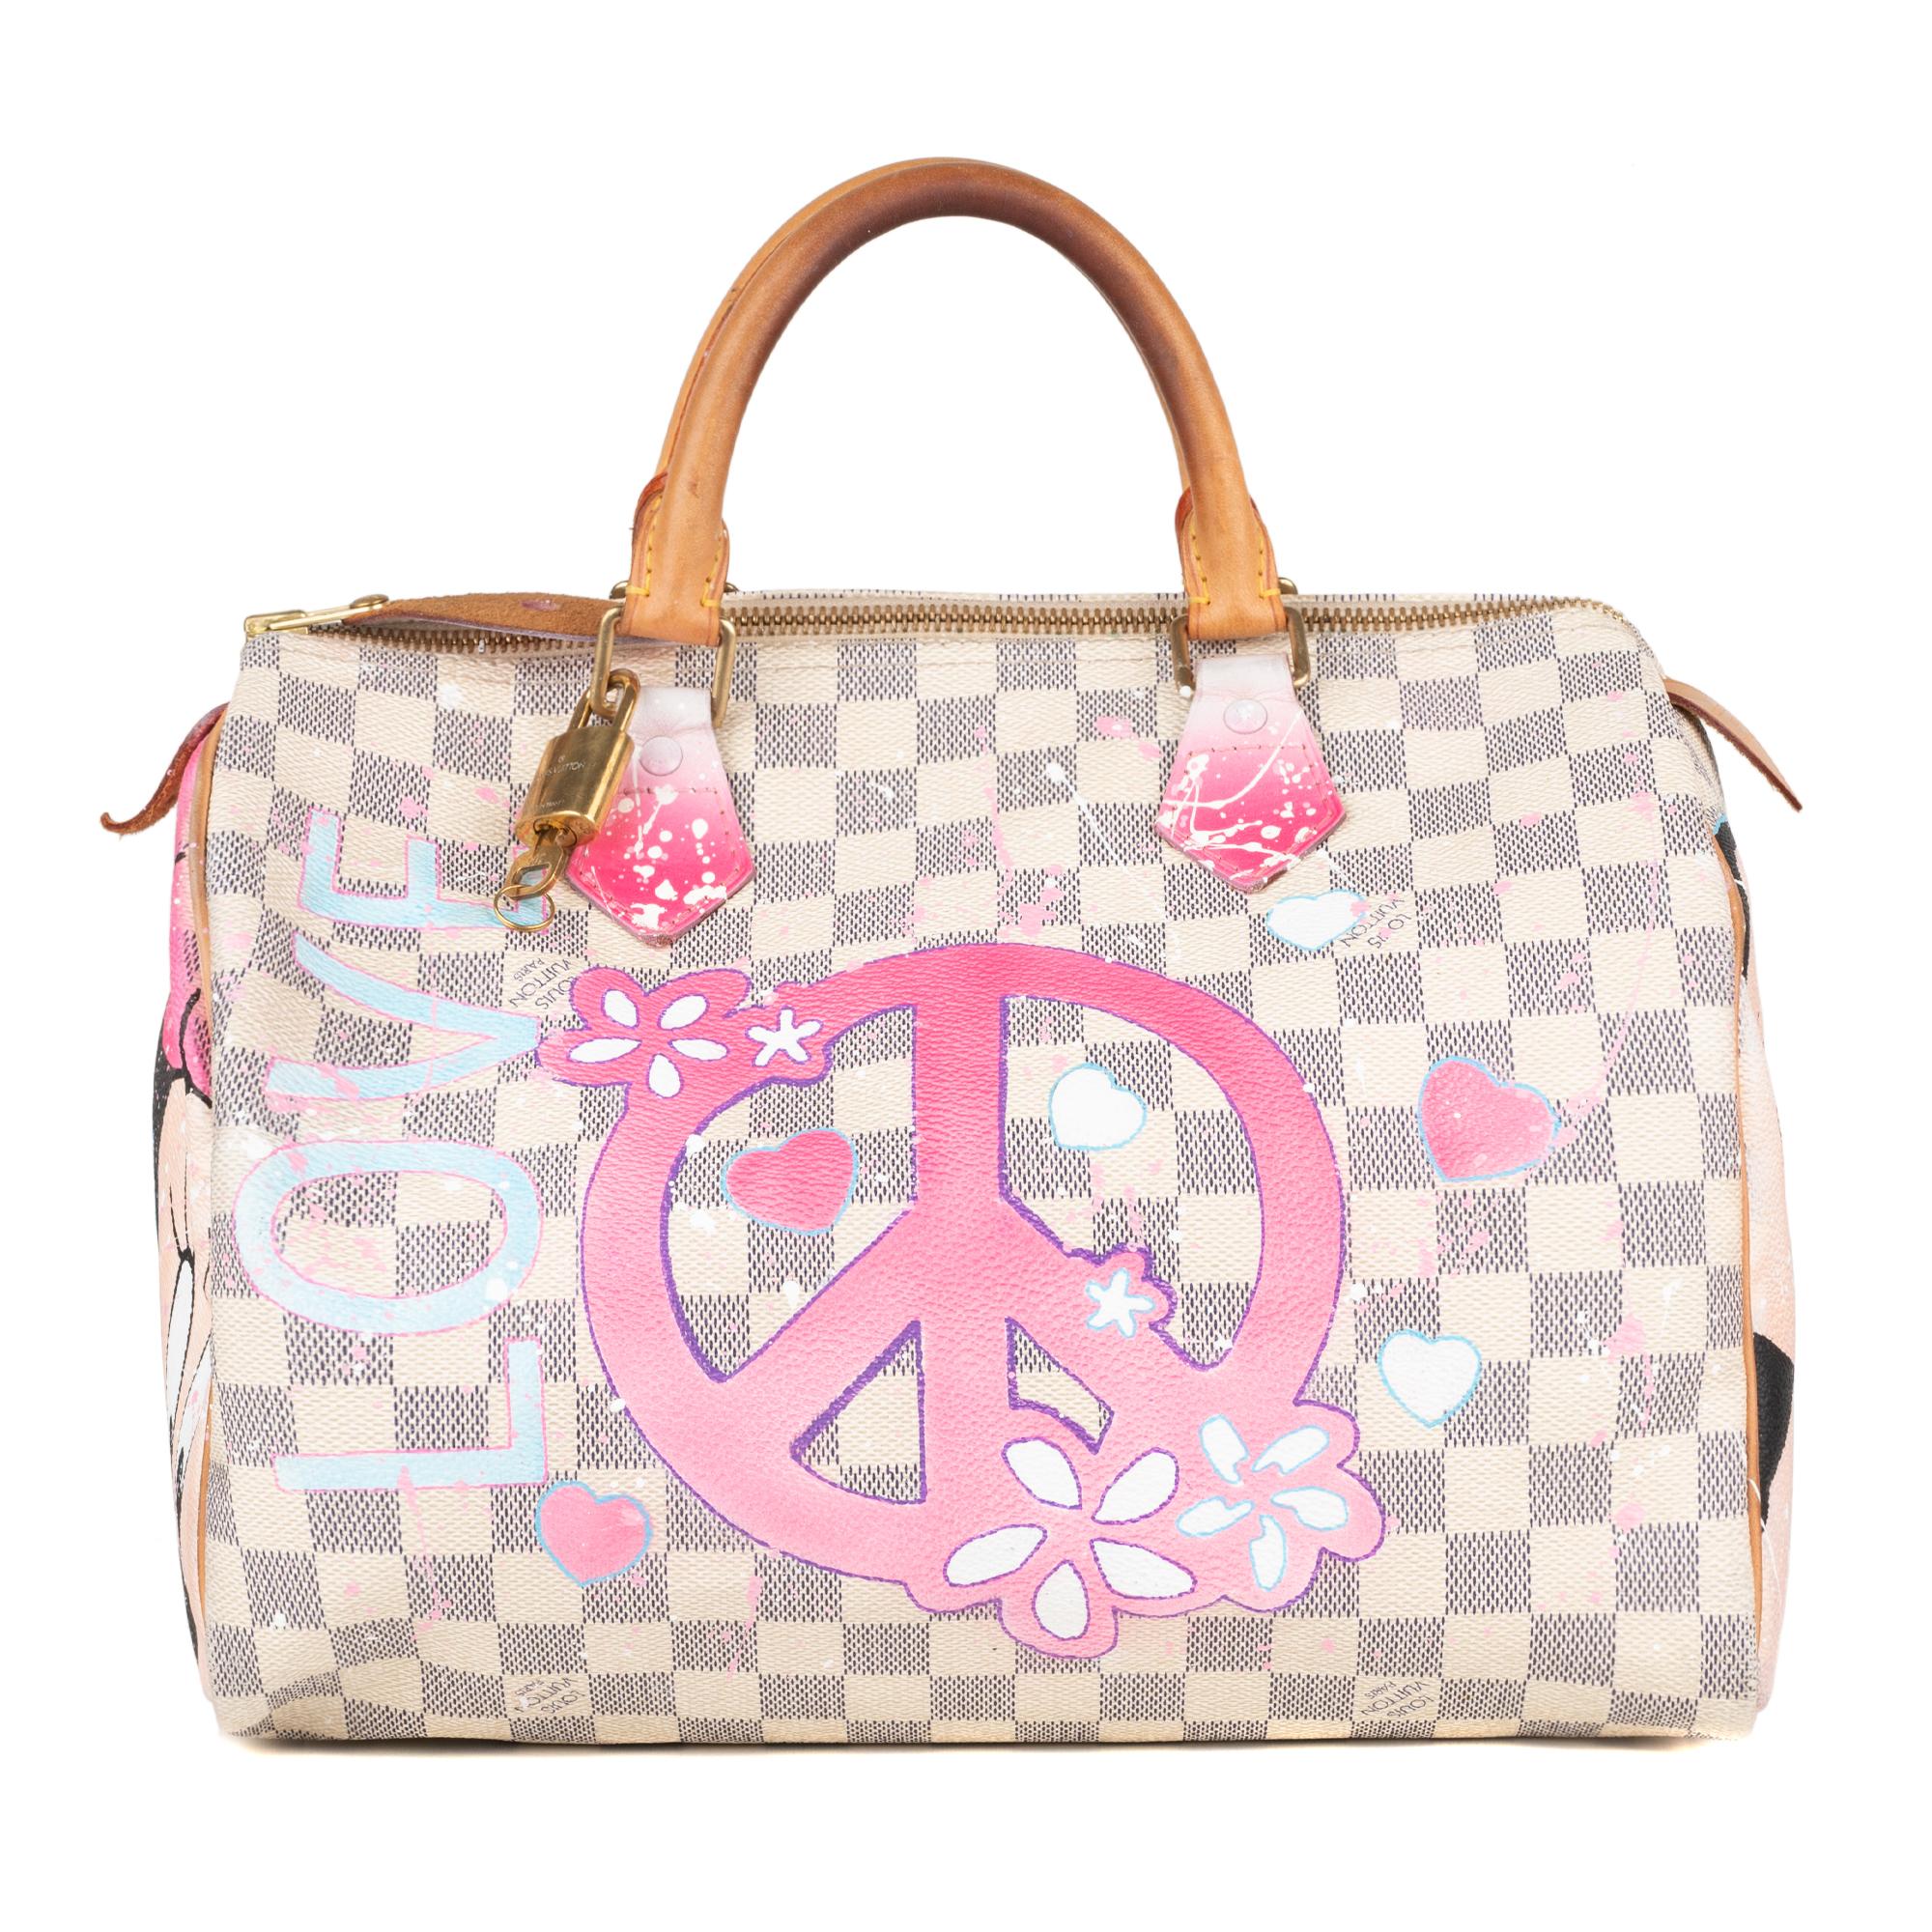 Superb handbag Louis Vuitton Speedy 30 cm in beige canvas and natural leather, gold metal trim, double handle in natural leather allowing a handheld.
This article was personalized by the trendy artist in Street Art Patbo on the theme of